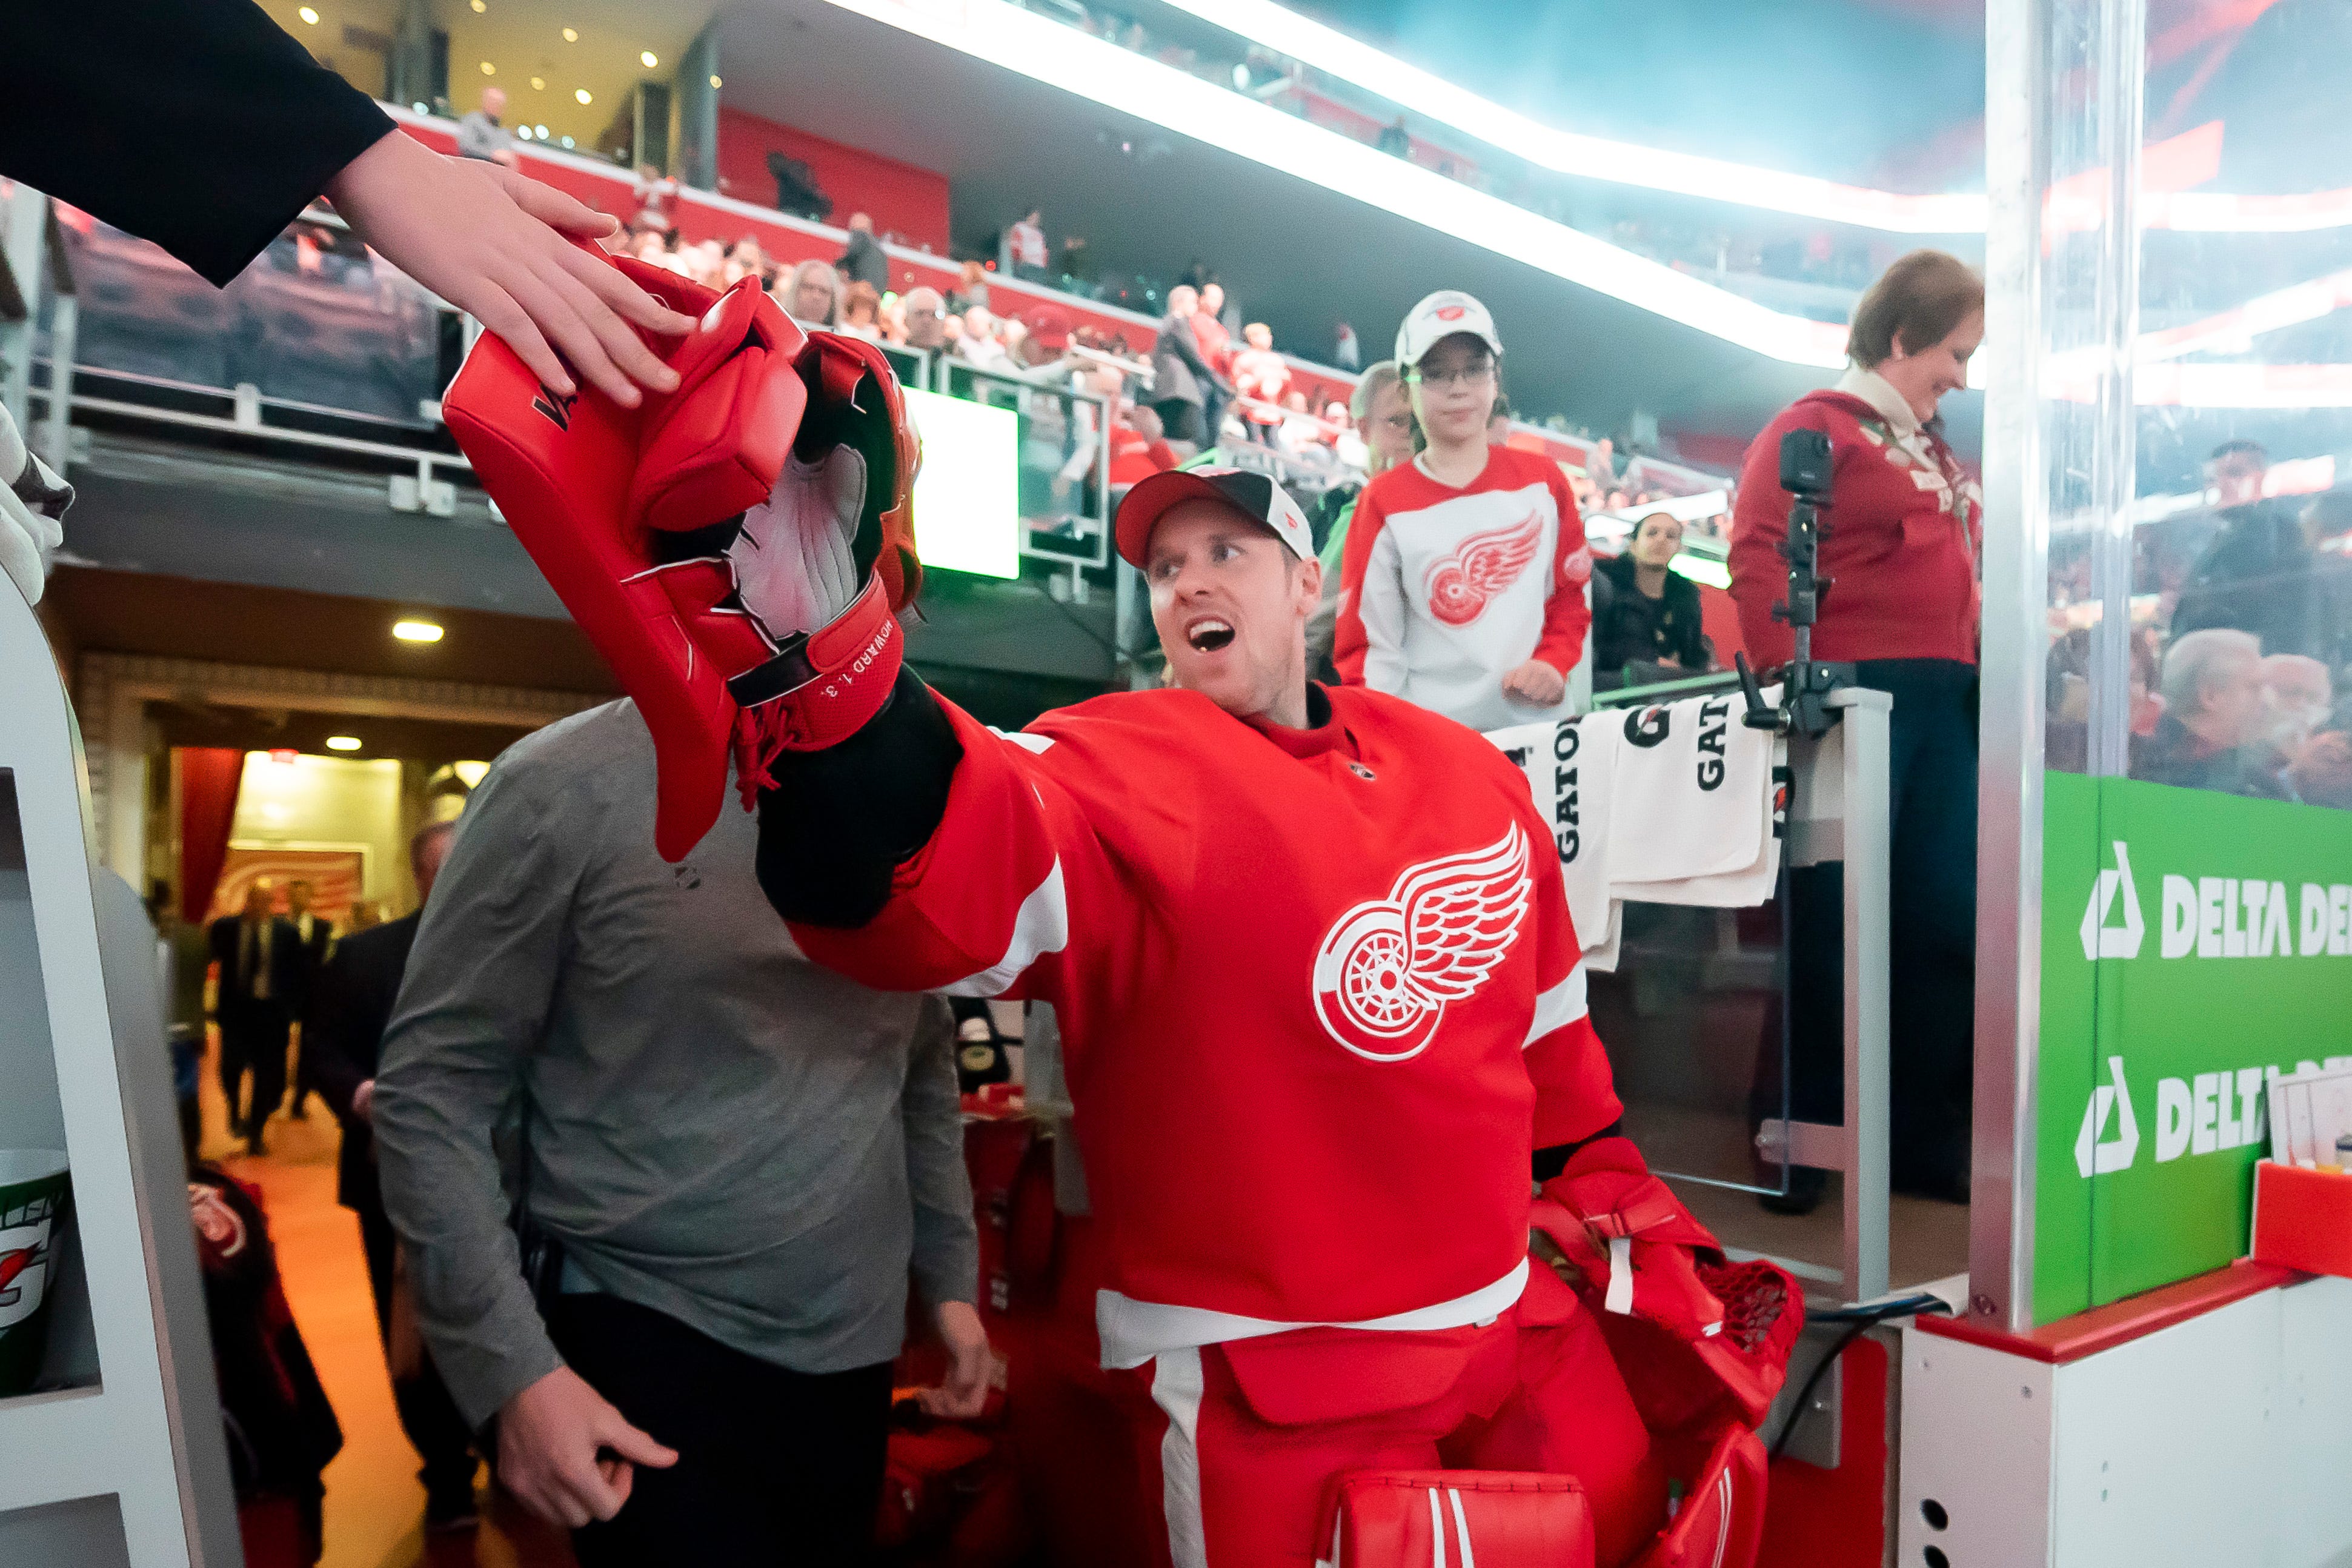 Jimmy Howard – AGE: 36. CONTRACT: Unrestricted free agent. STATS: 2-23-2, .882 SVS, 4.20 GAA. COMMENT: Simply put, nothing went right for Howard in what likely was his last season with the Wings. Howard didn’t get much help in front of him, but he didn’t make nearly enough stops, either. A sad ending to a fine Wings career. GRADE: F.